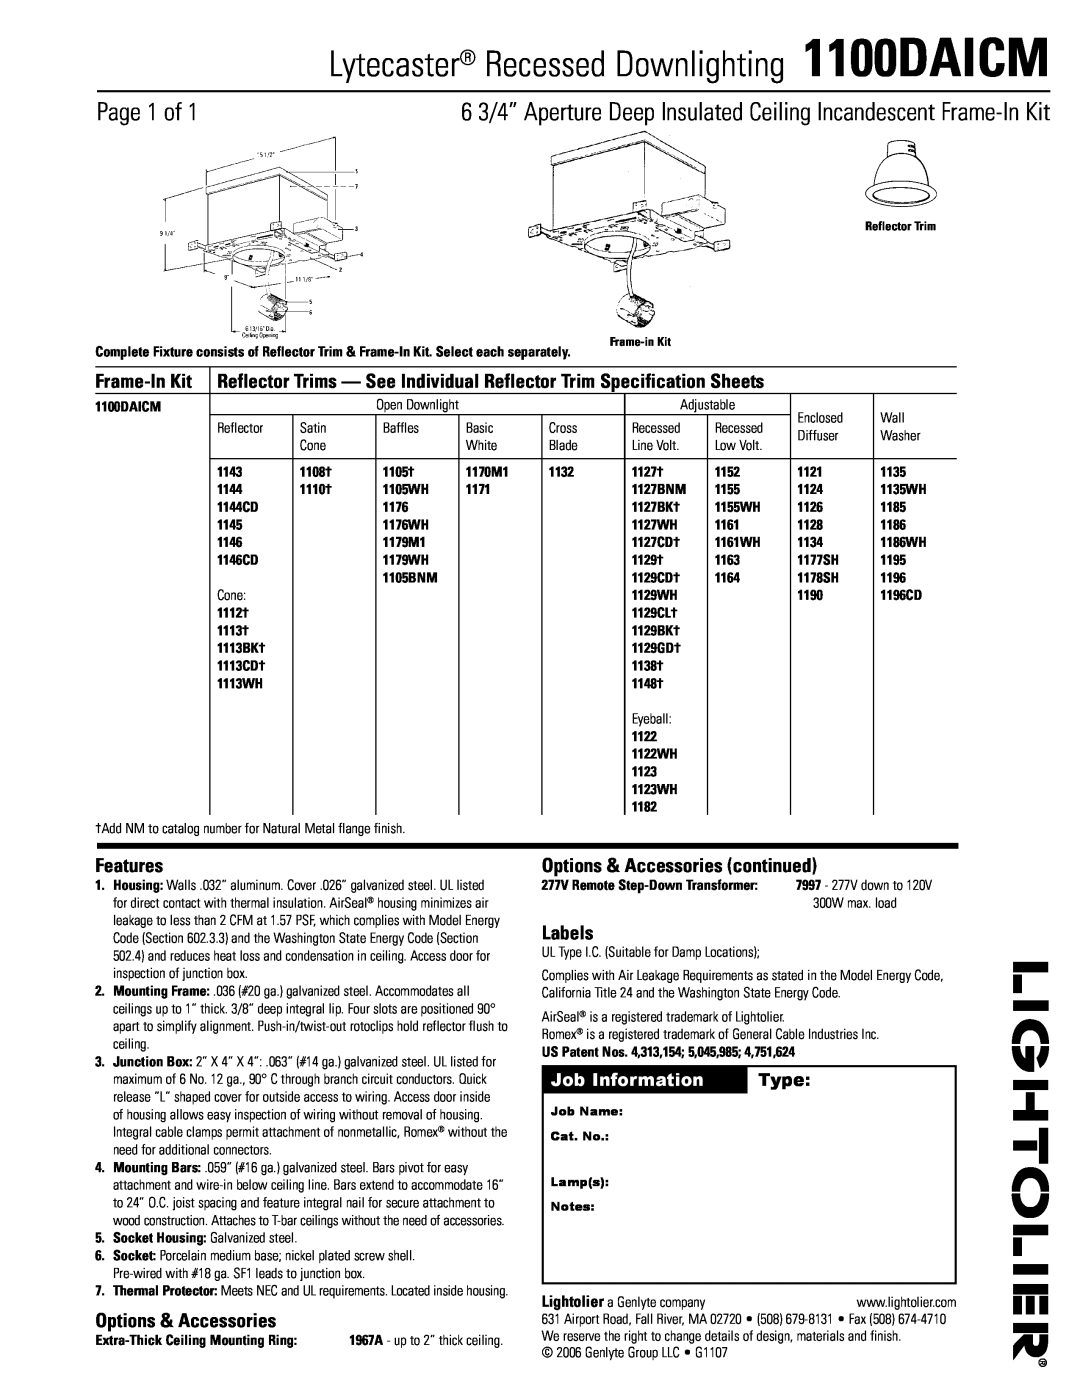 Lightolier specifications Lytecaster Recessed Downlighting 1100DAICM, Page  of, Frame-InKit, Features, Labels, Type 